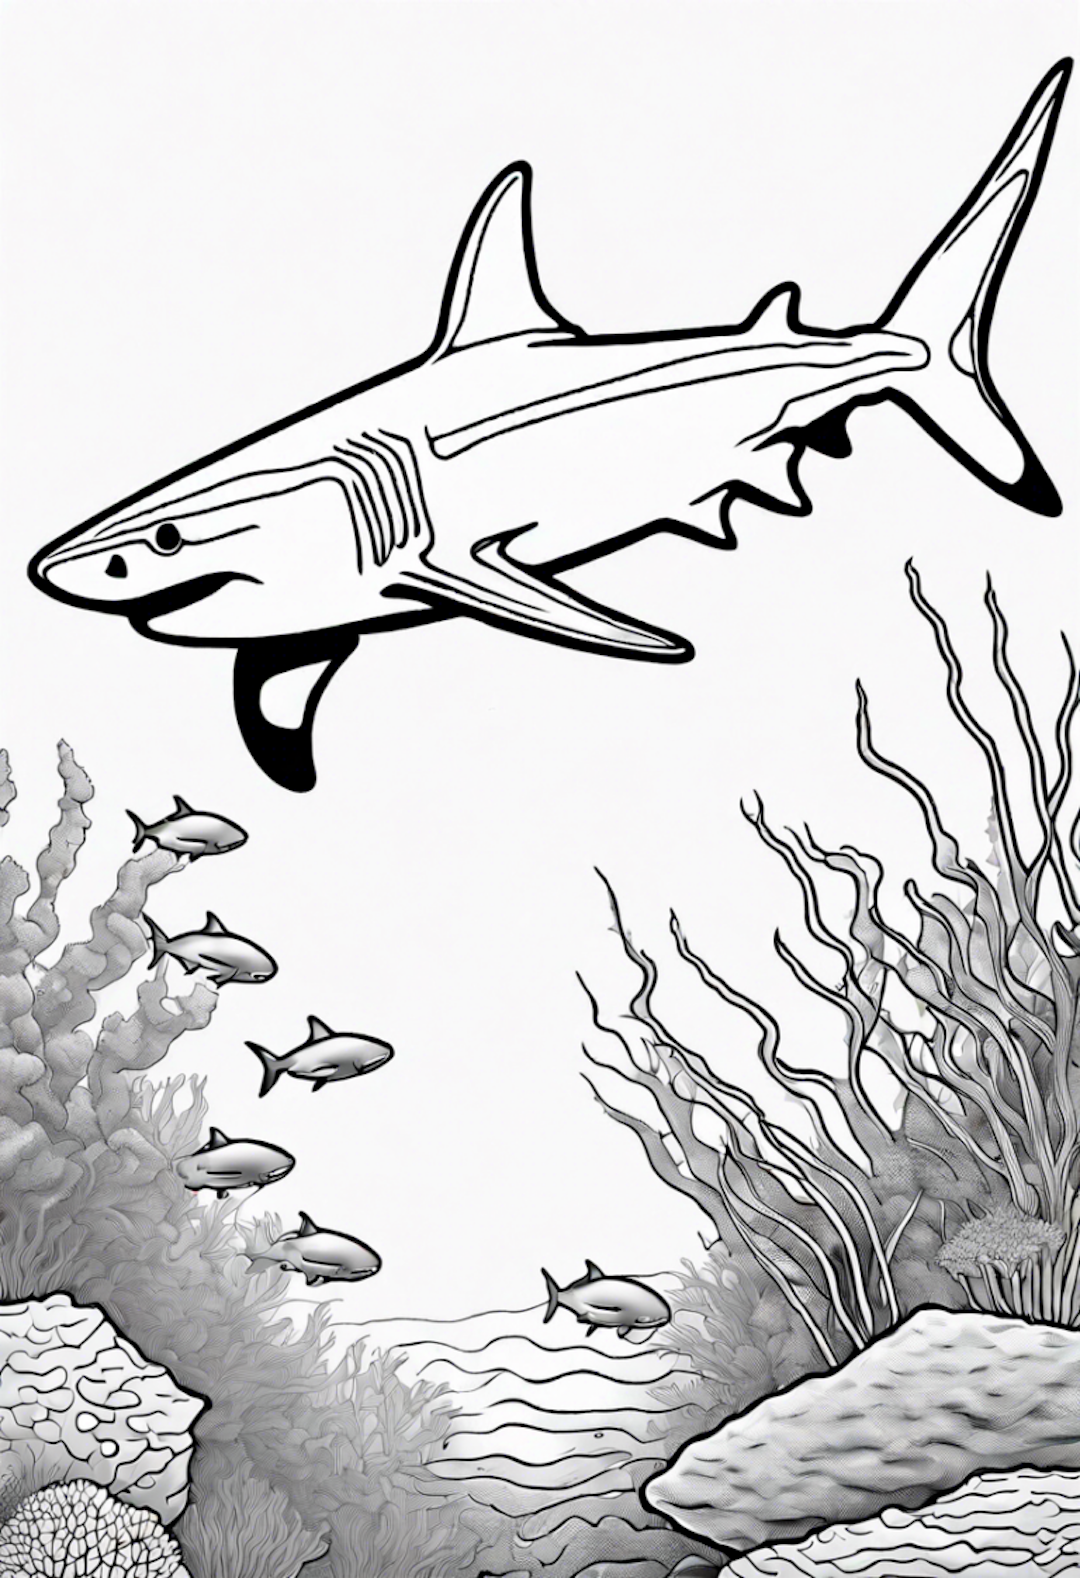 Reef Shark coloring pages